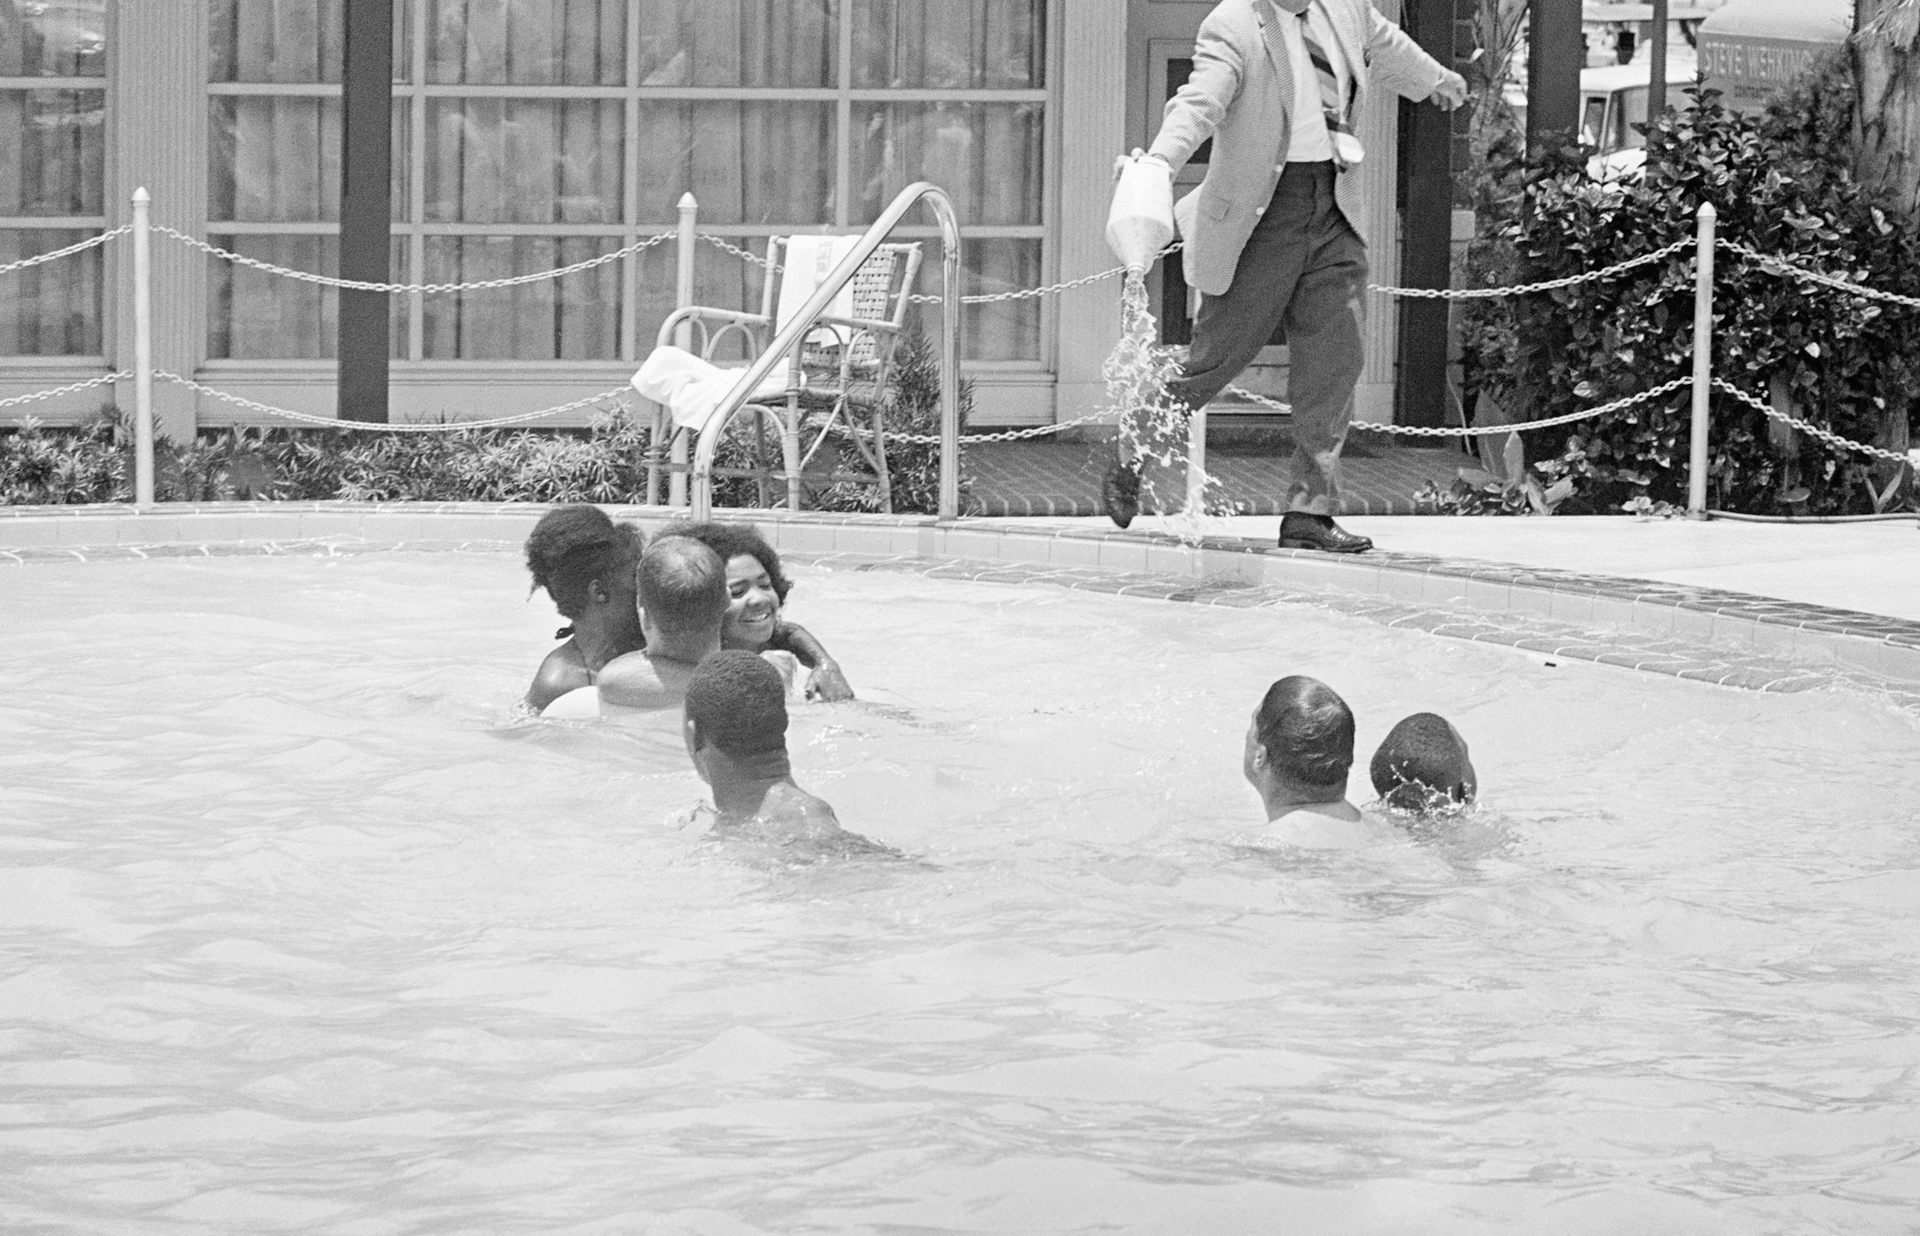 The forgotten history of segregated swimming pools and amusement parks pic